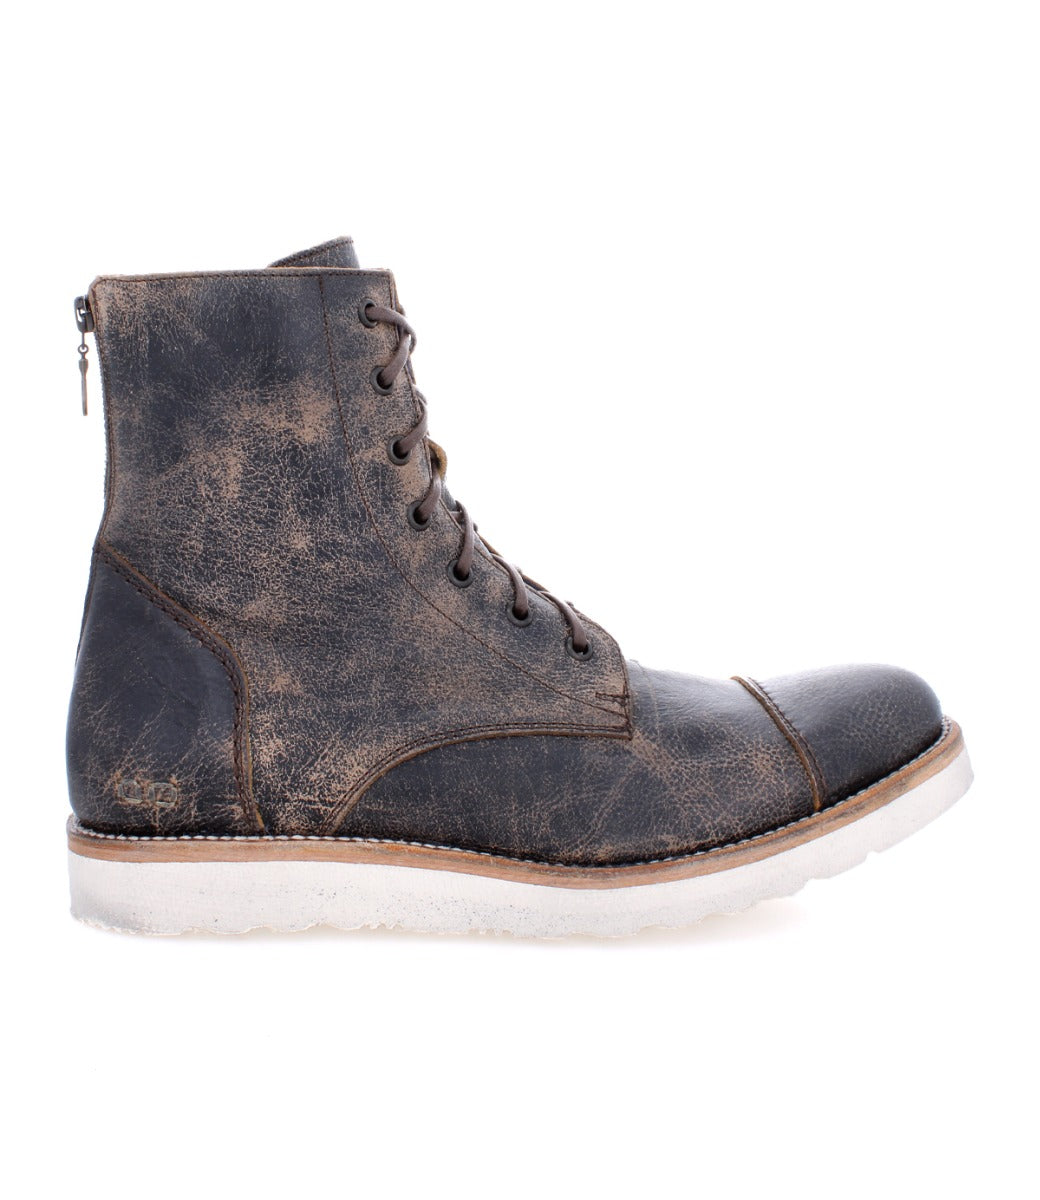 A worn, dark leather lace-up Bed Stu Protege Light Black Lux Boot with a zipper on the side and white lightweight shock-absorbing outsole, isolated on a white background.